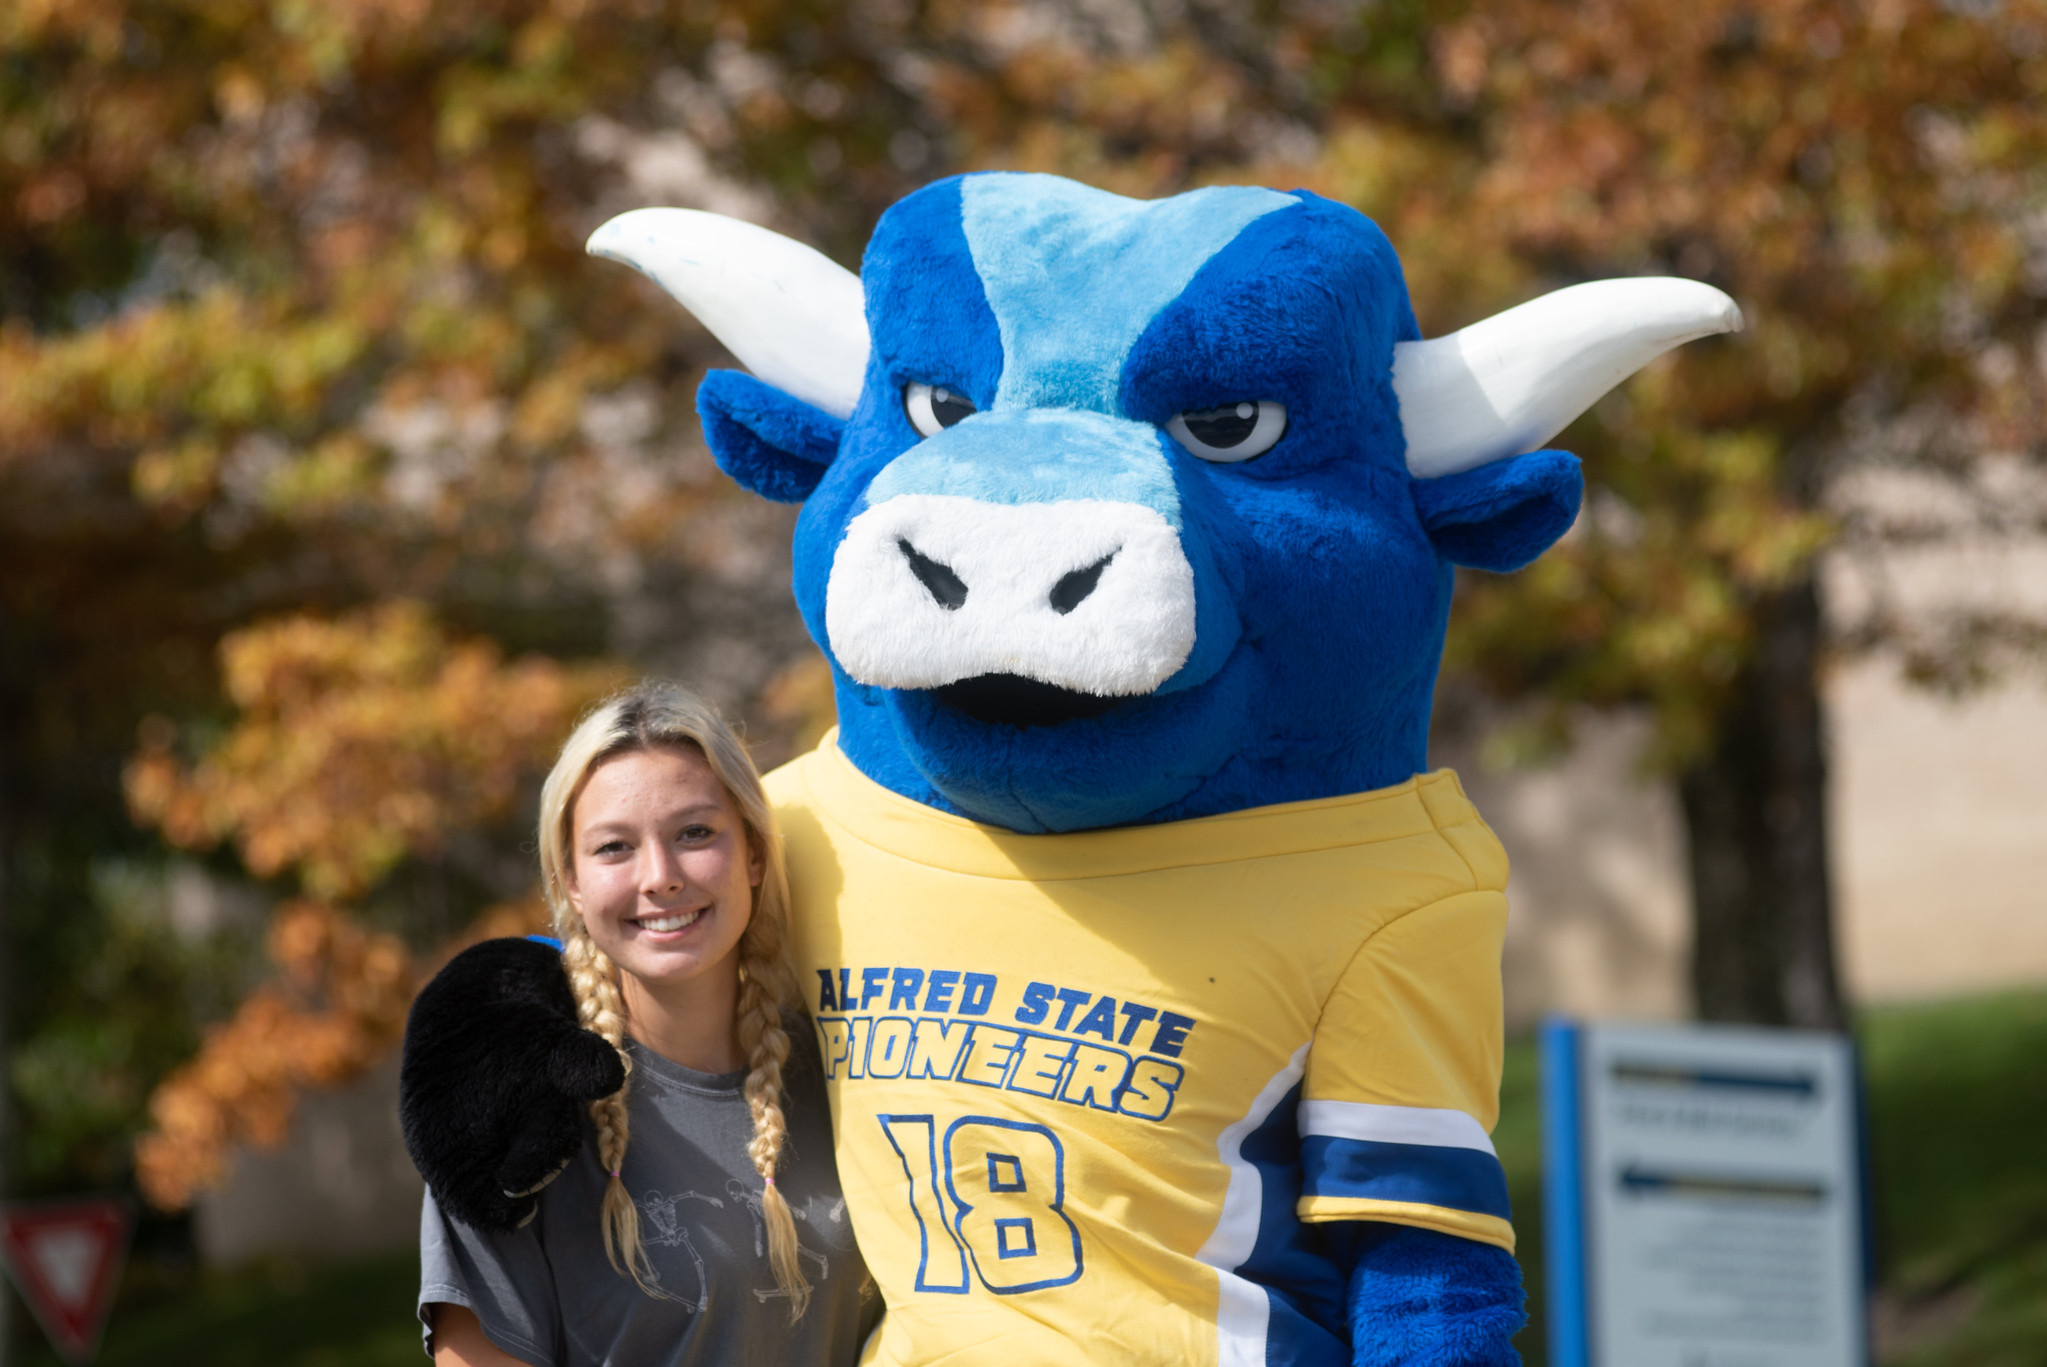 Students visiting the Alfred State campus can meet Big Blue the mascot and learn about Free Tuition Plus.